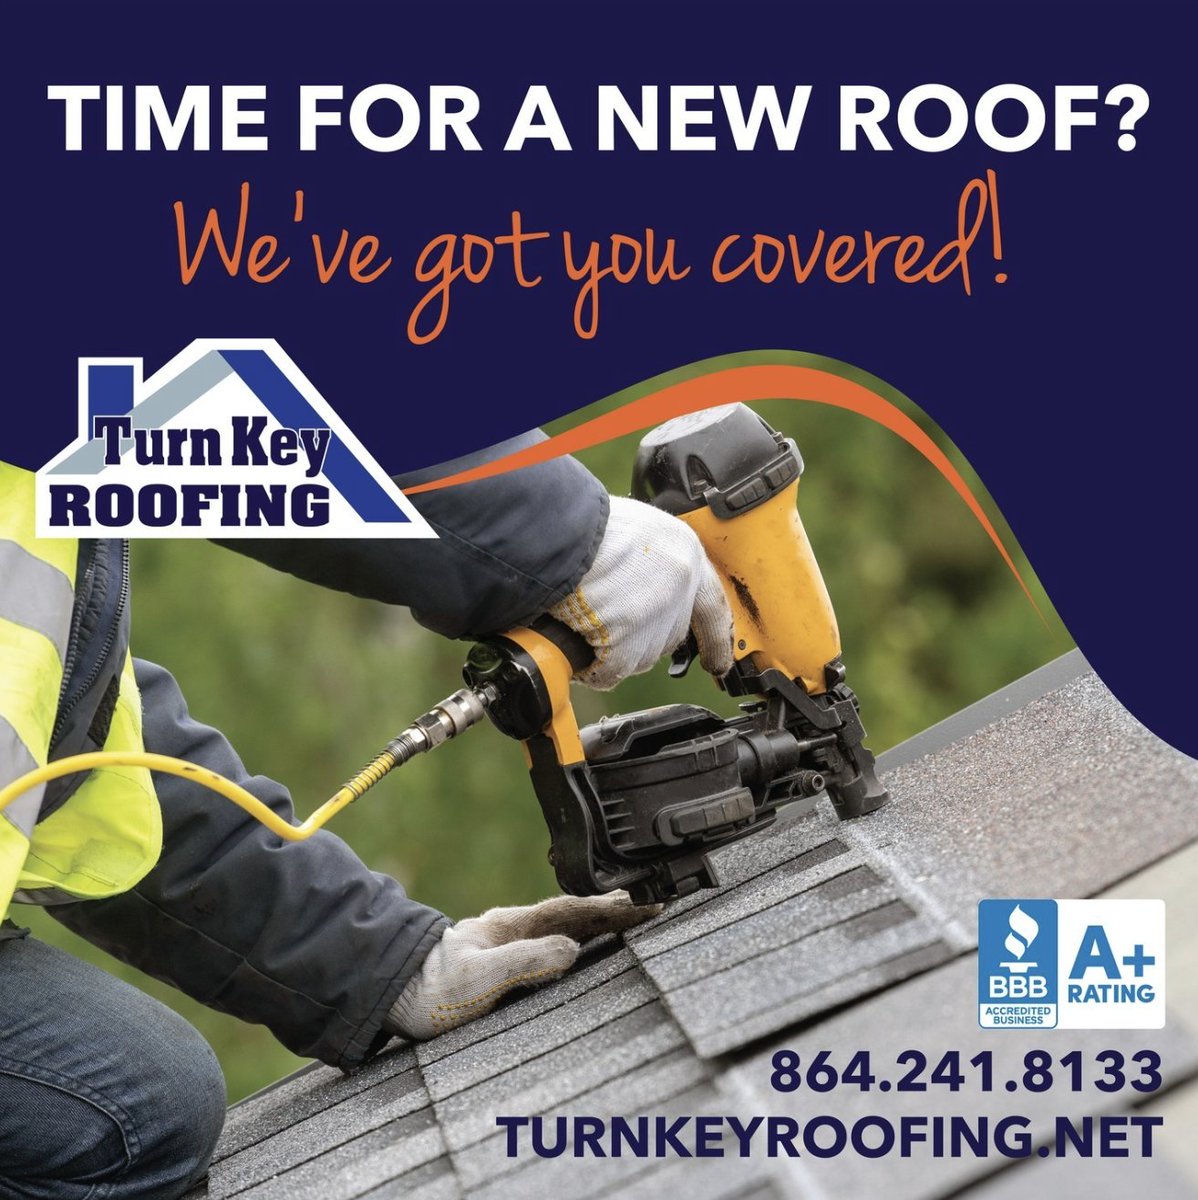 Is your house ready for a new roof? We’ve got you covered!

📲864.241.8133

#RoofingContractor #Roofing #NewRoof #Andersonismytown #YeahthatGreenville #TurnKeyRoofing #RoofInspection #Home #stormdamage #residential #roofing